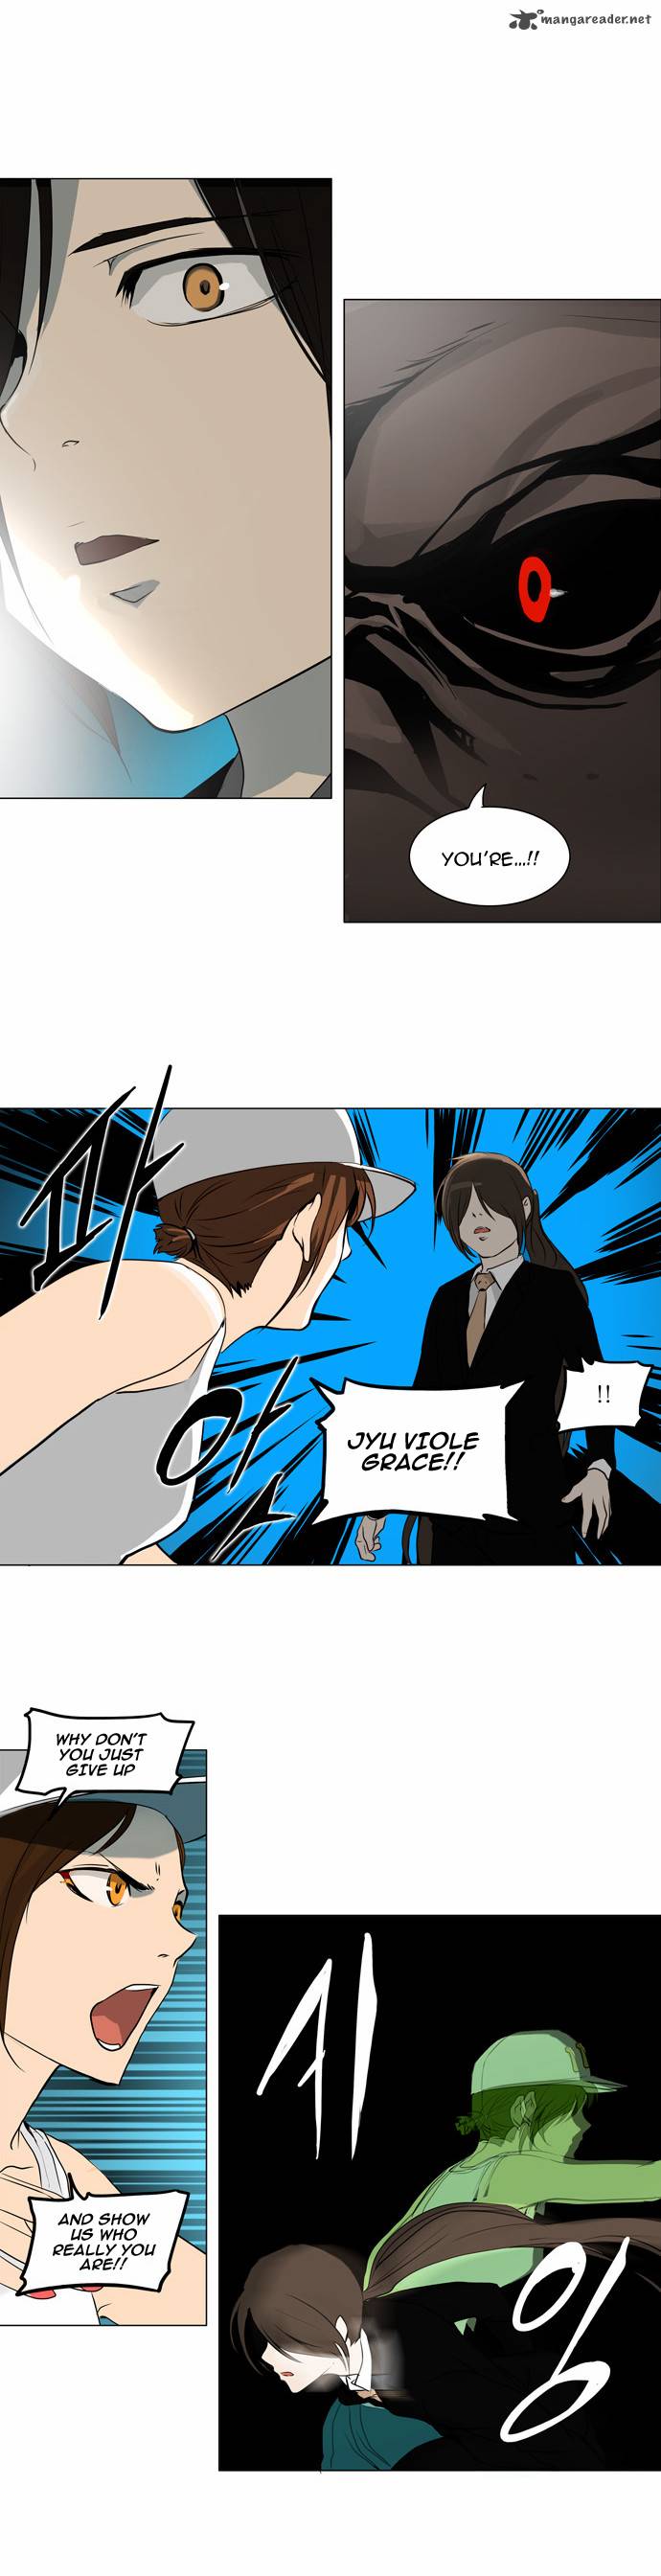 Tower Of God 160 38